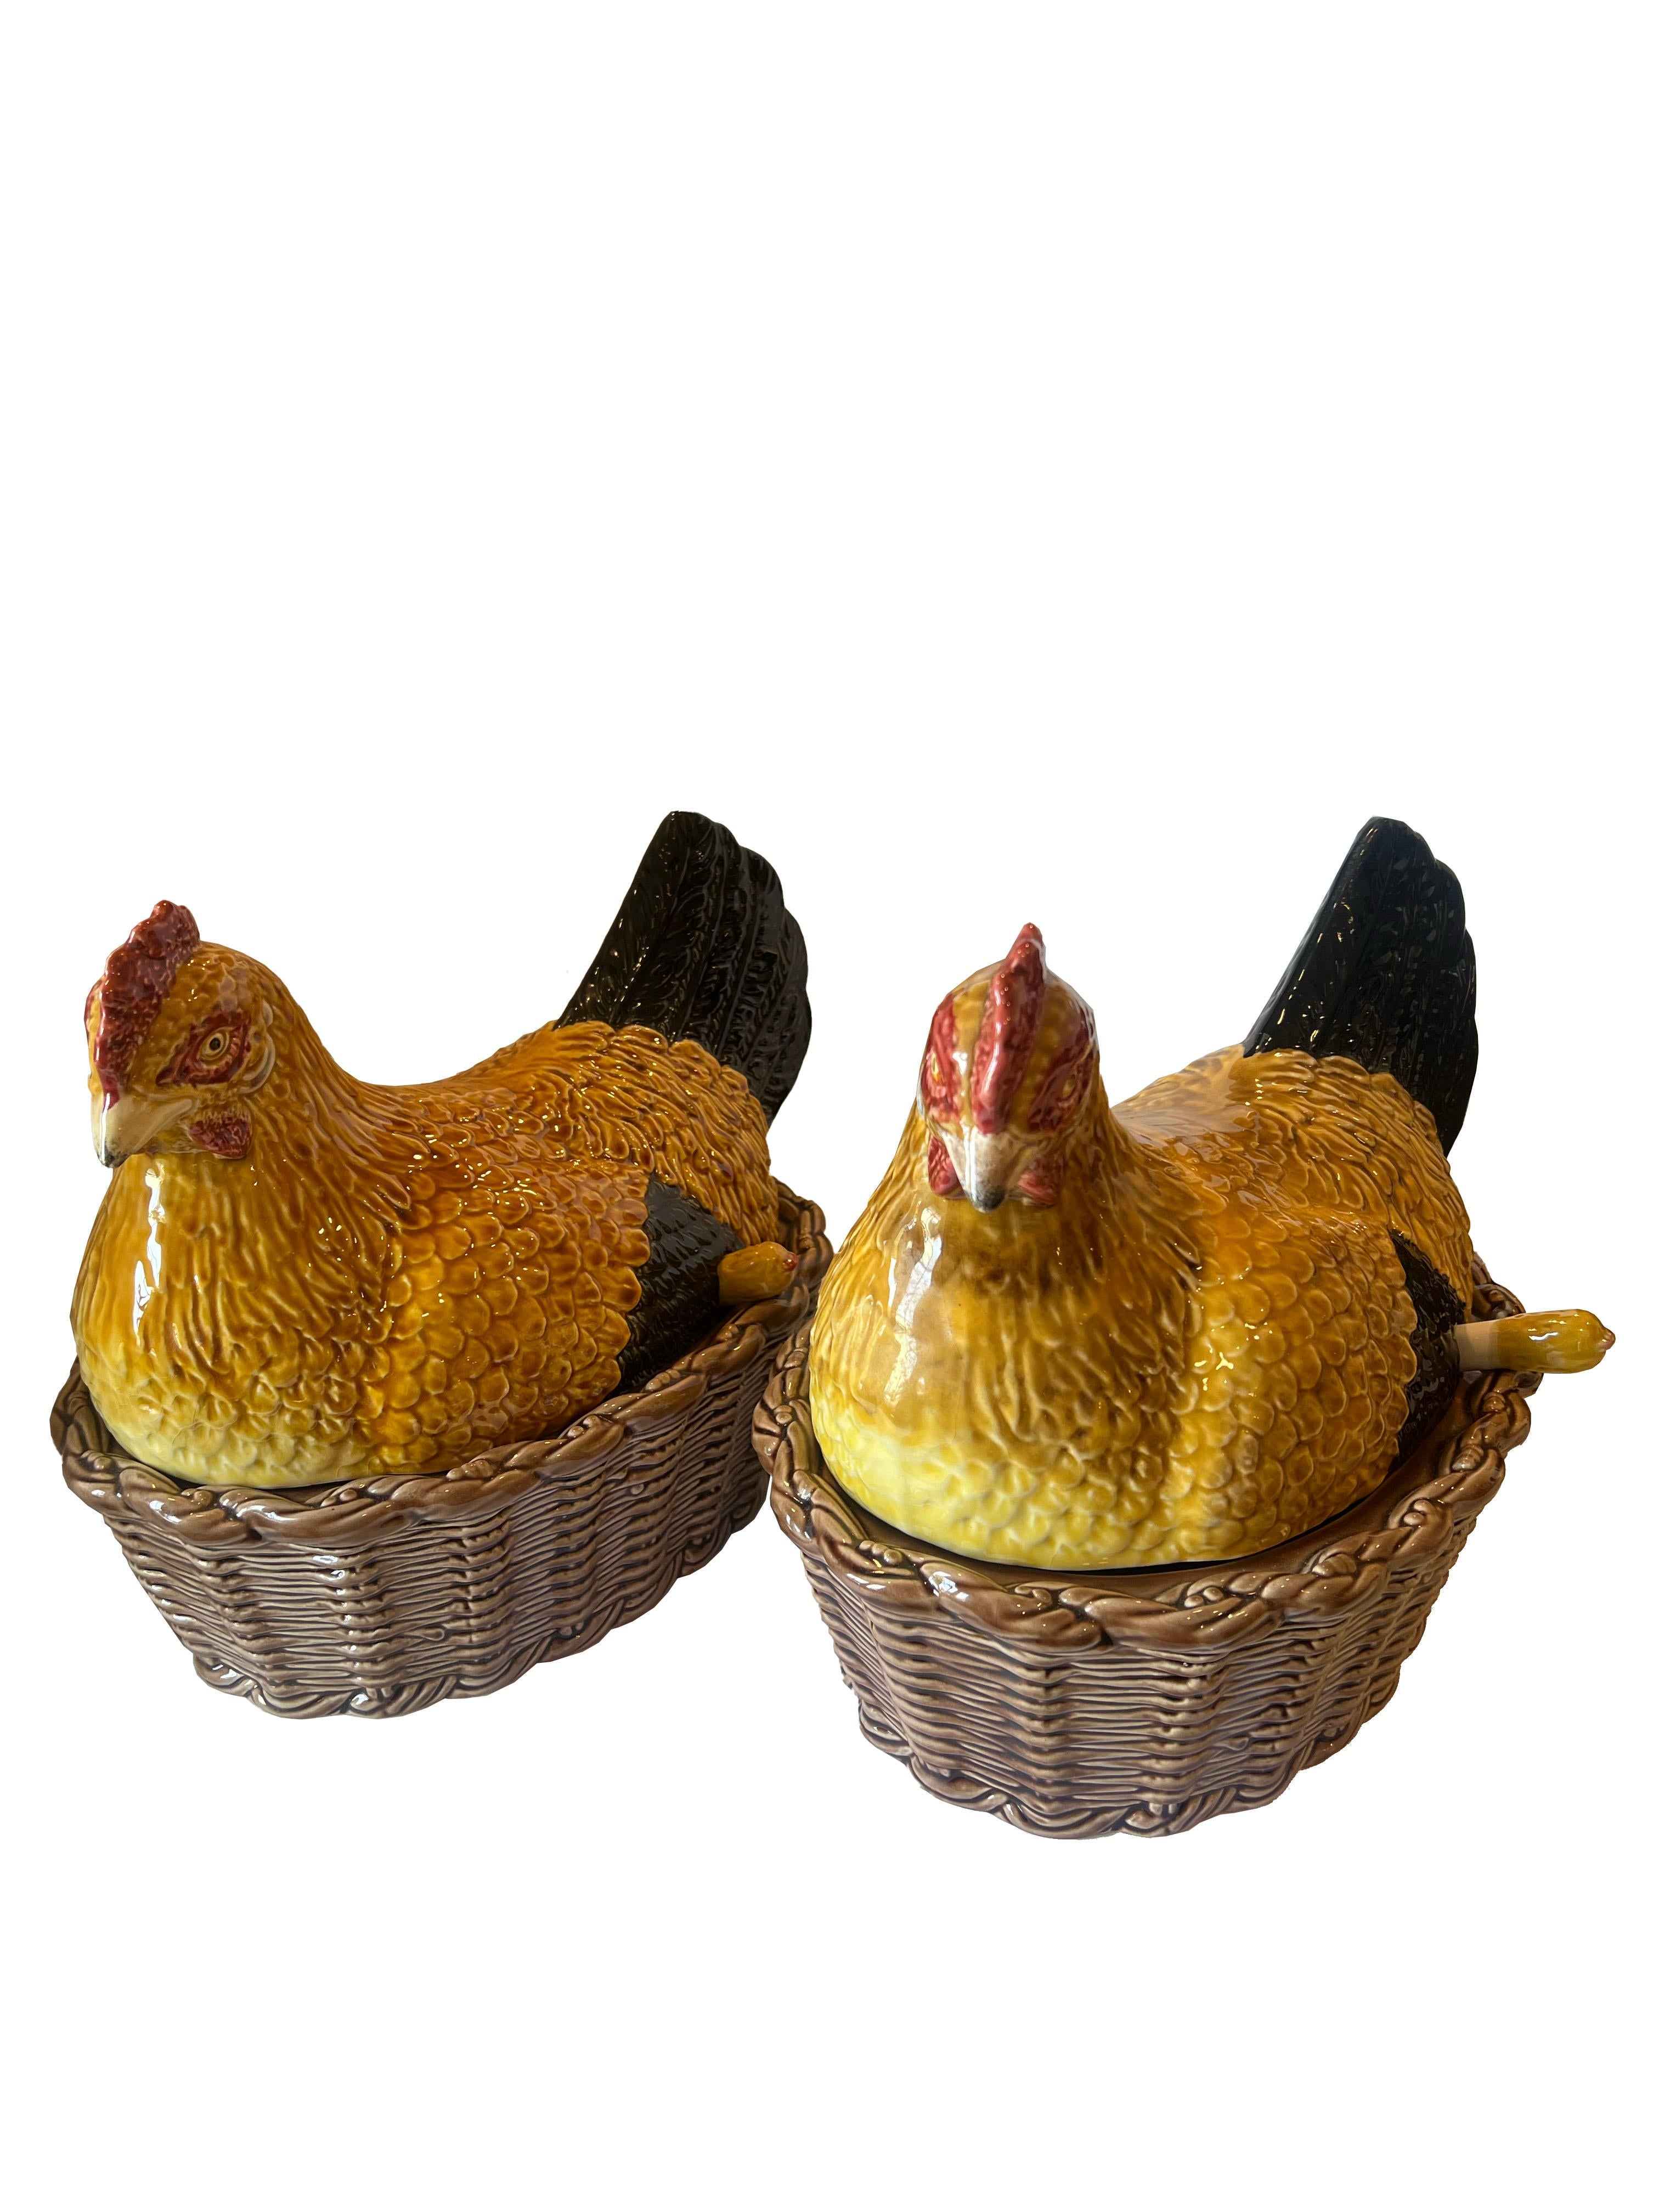 A delightful pair of vintage soup tureens in the form of hens, adding a whimsical touch to your dining experience. Crafted with meticulous artistry, these unique tureens are accompanied by coordinating ladles cleverly shaped like eggs. Expertly